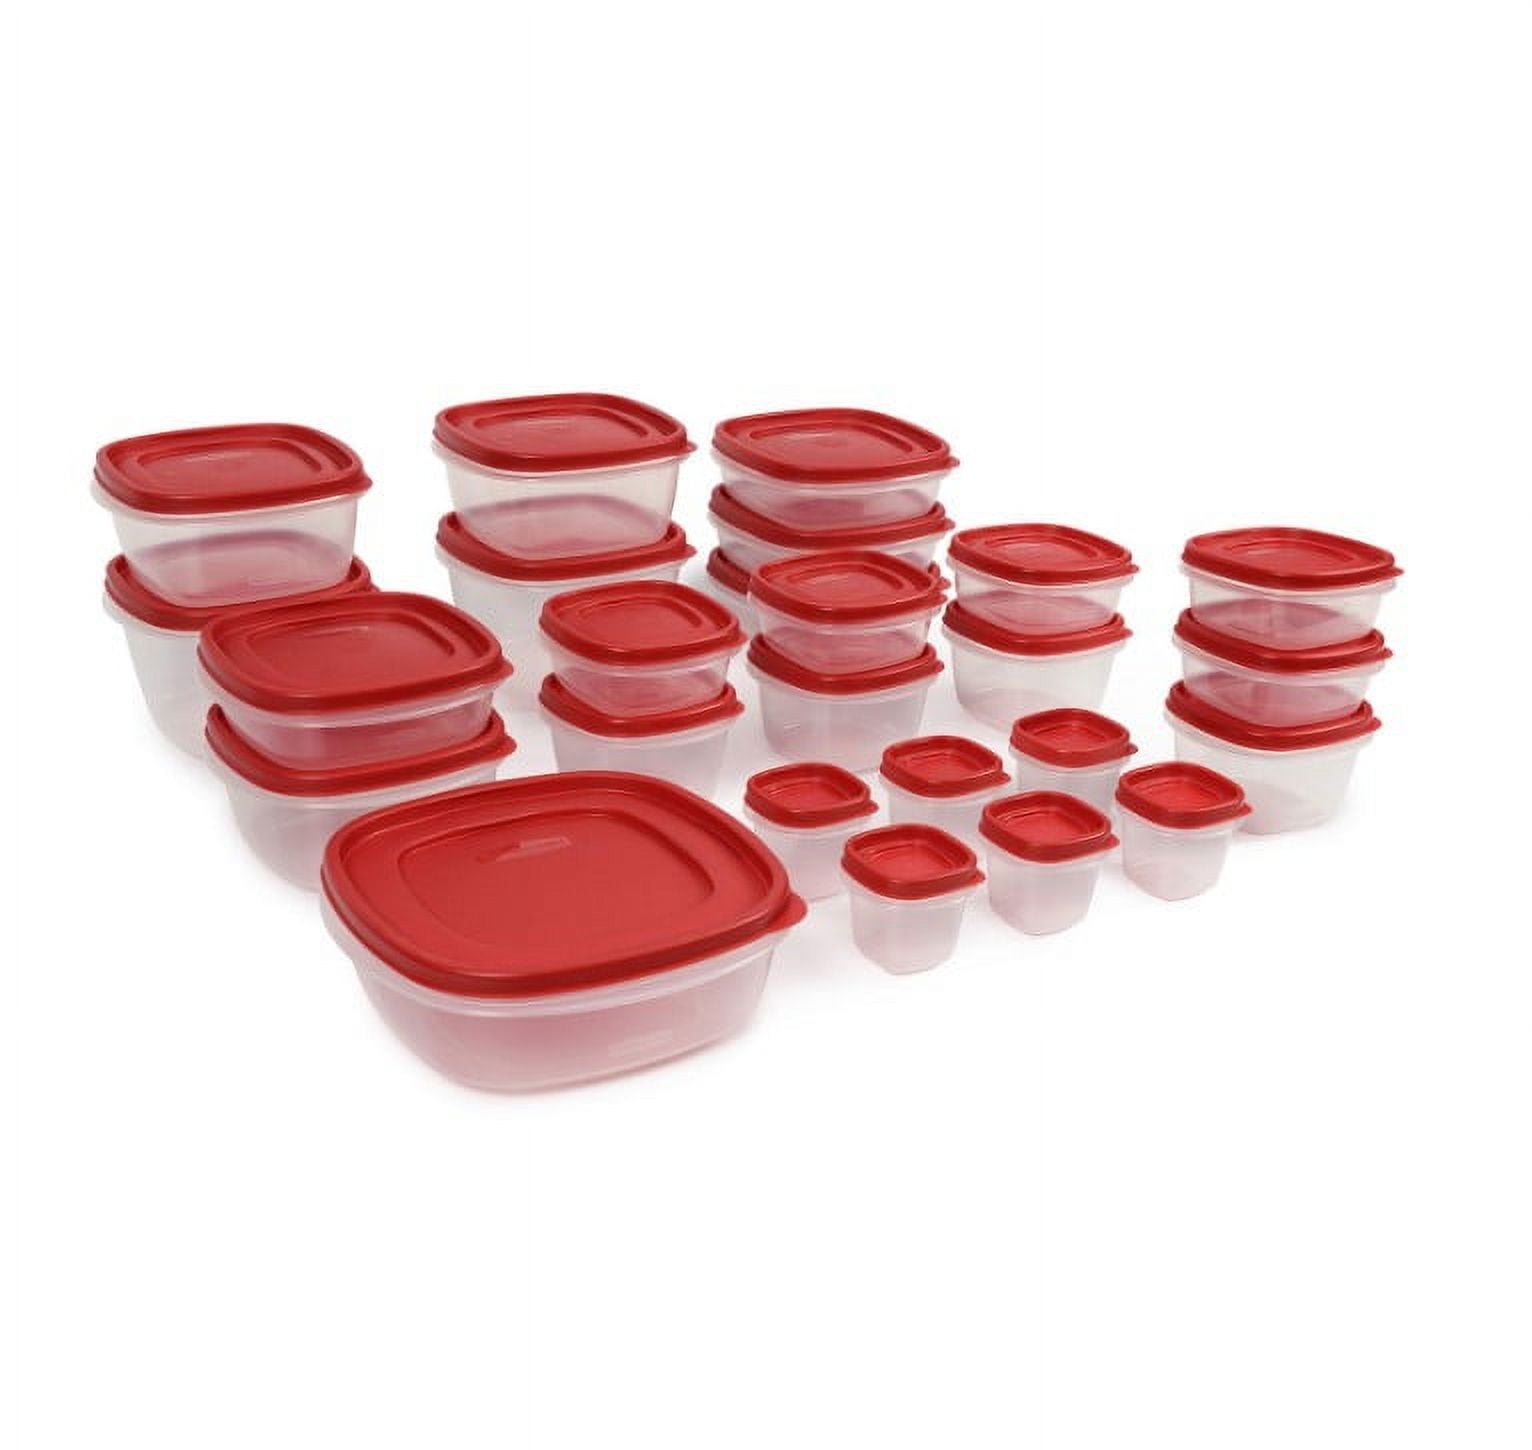 Tupperware / Rubbermaid Replacement Lids +! Your choice $1.00 - $4 Combine  Ship